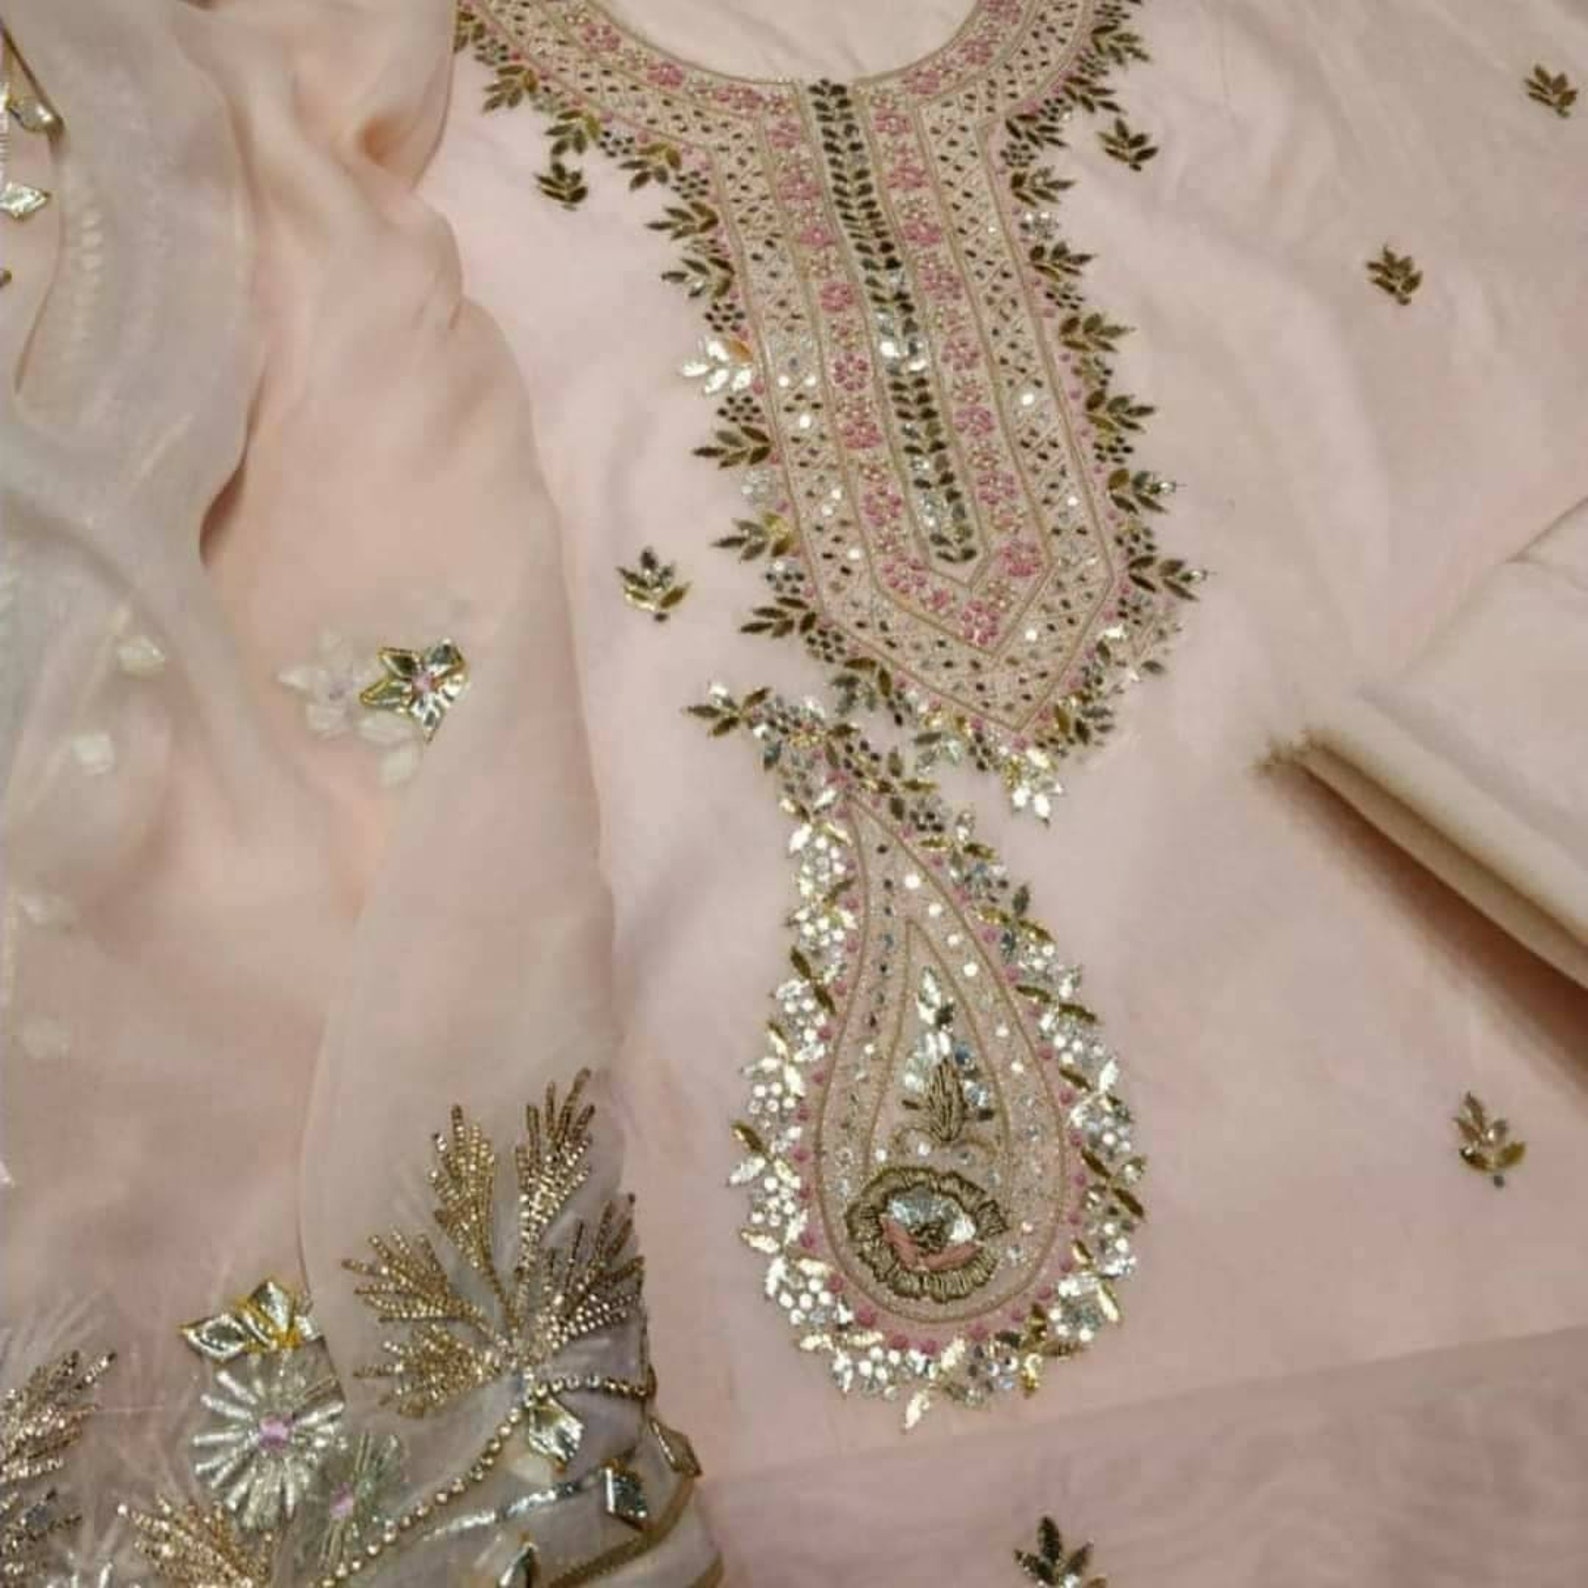 ATHARVA Hand Embroidered Salwar Kameez W/embroidery Neck Peach | Etsy